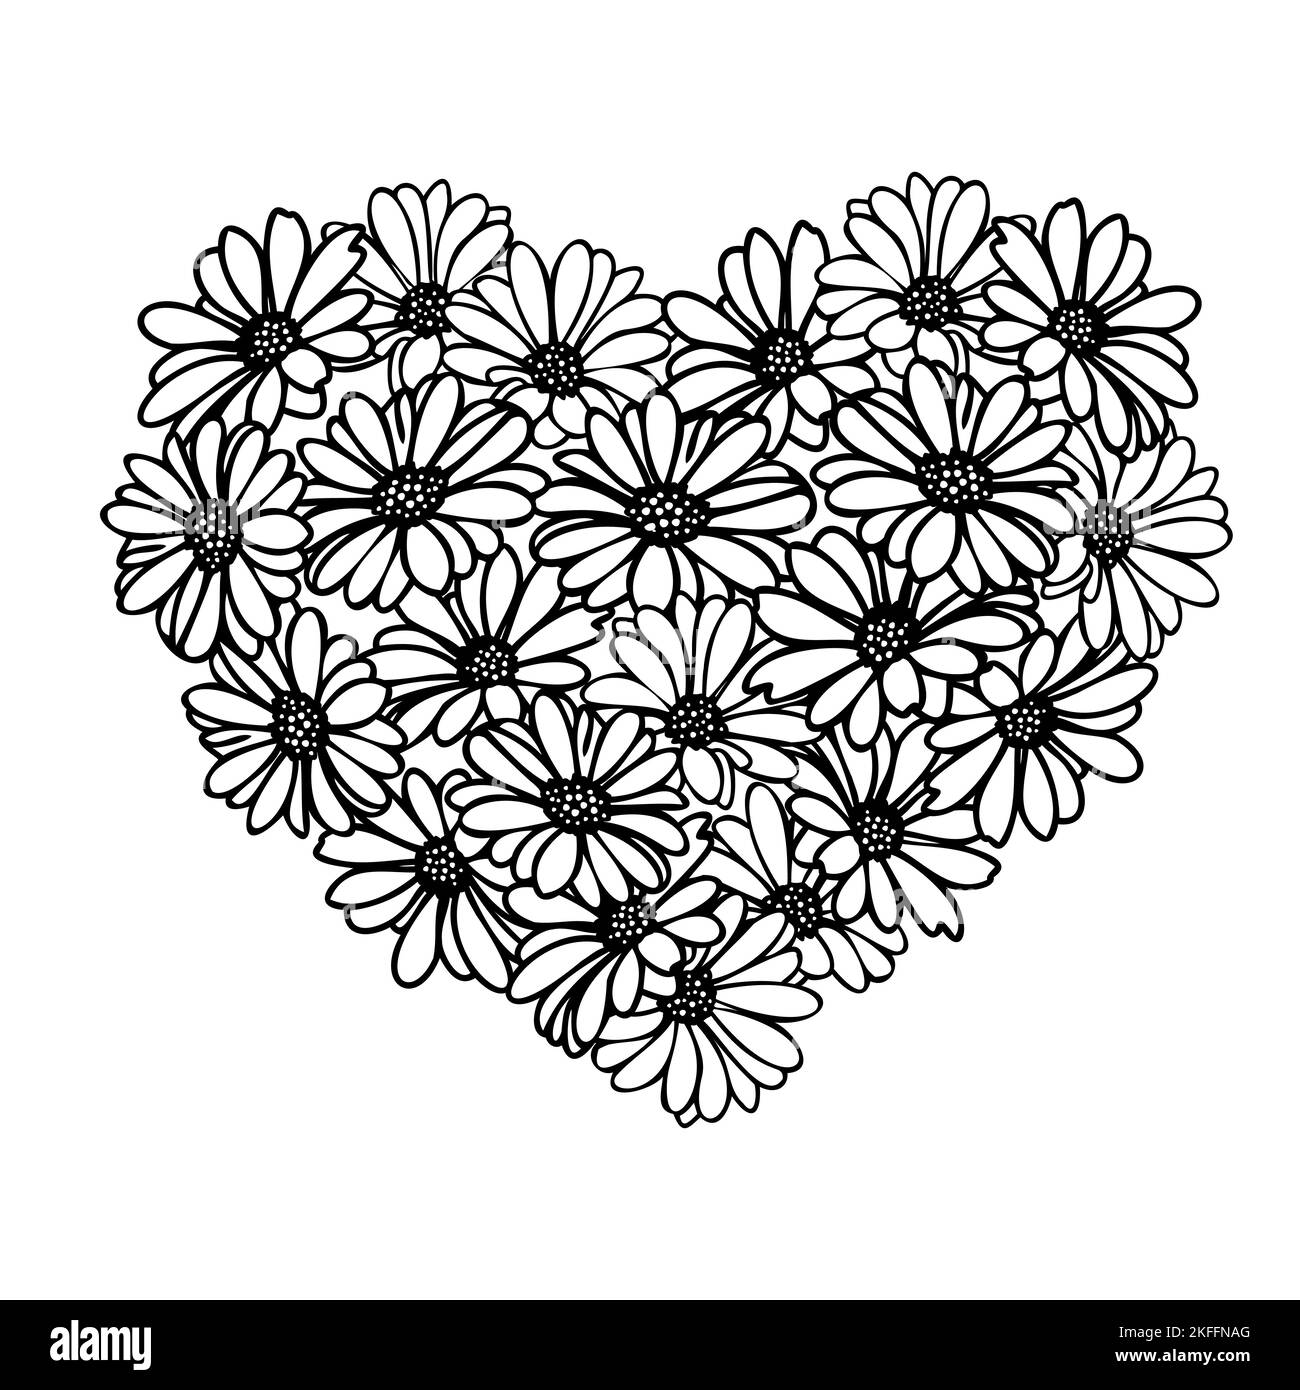 Valentines day floral heart frame with daisy flower Stock Vector